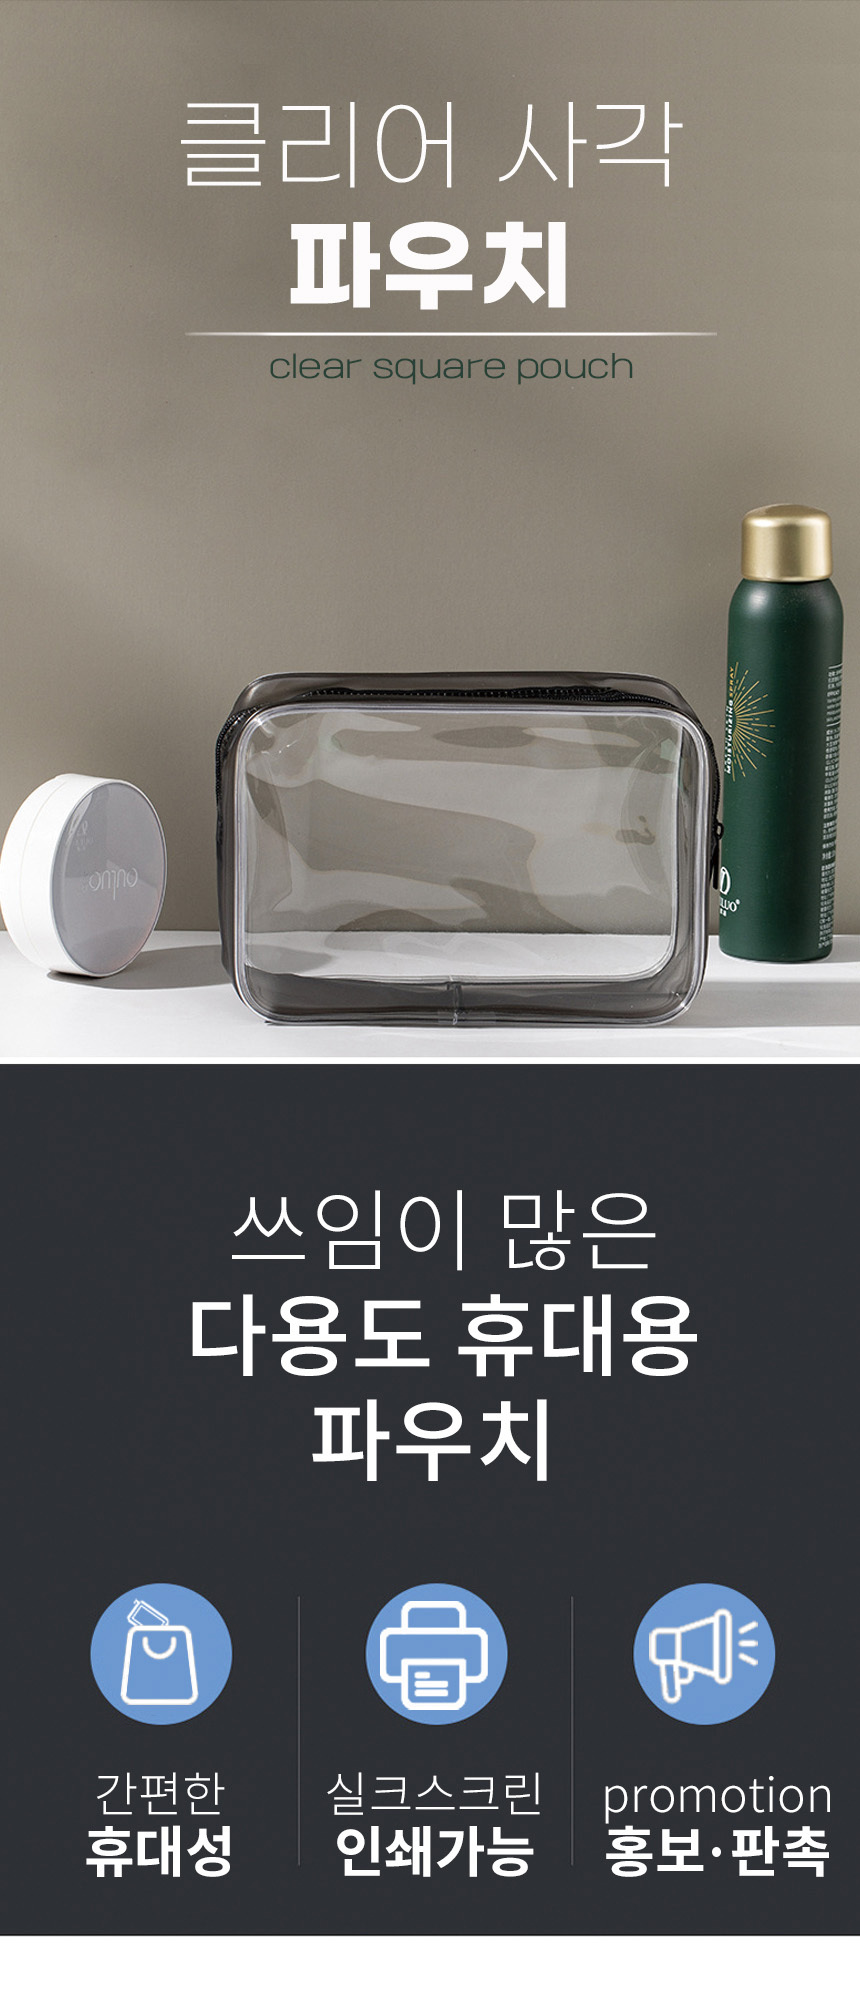 clear_square_pouch01.jpg